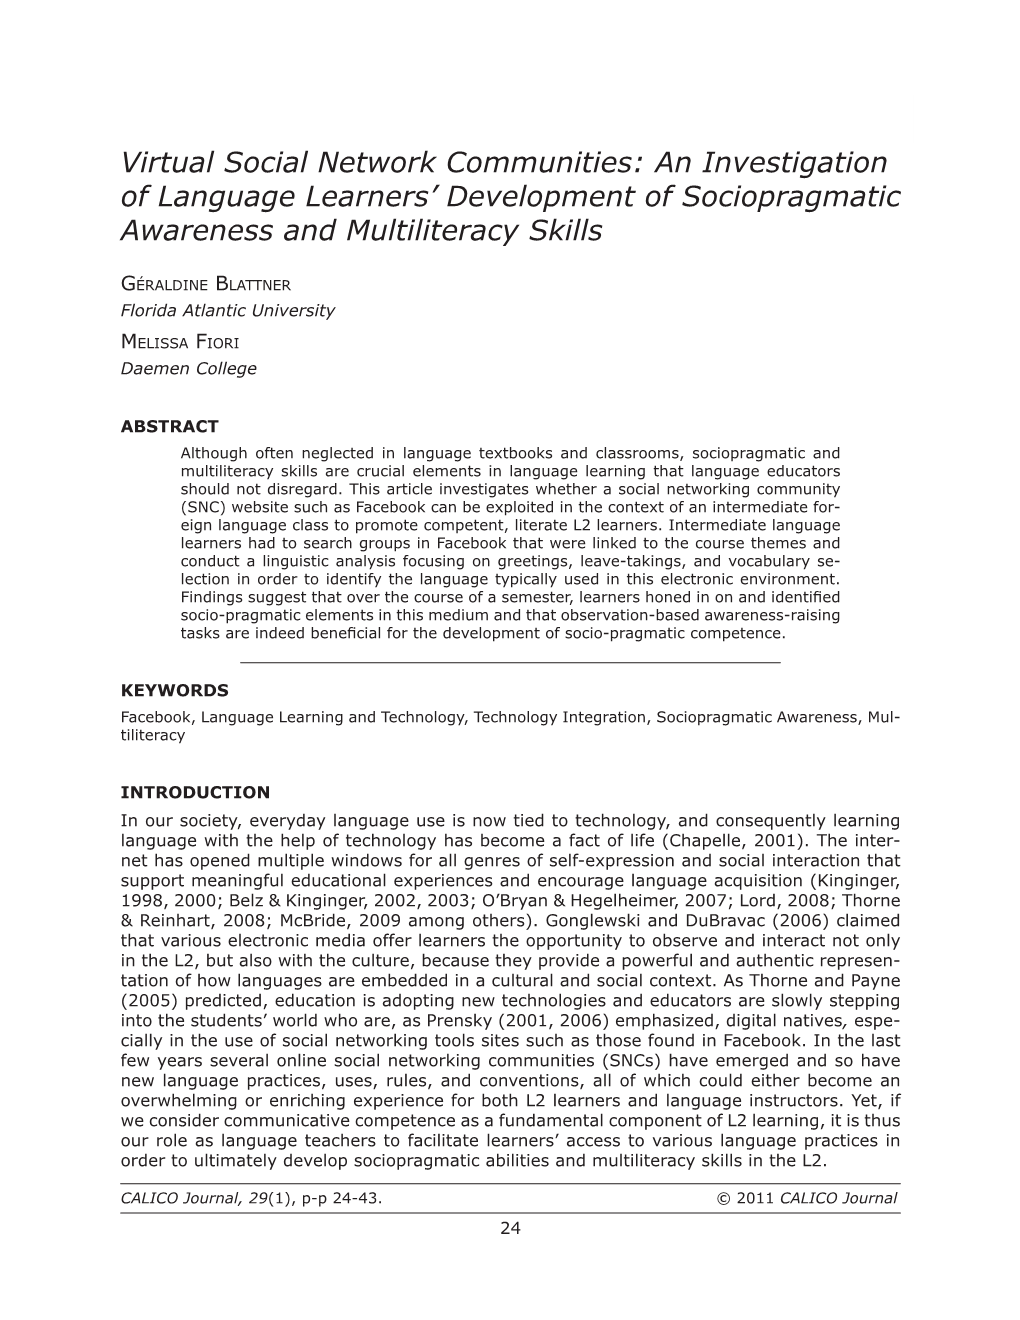 Virtual Social Network Communities: an Investigation of Language Learners’ Development of Sociopragmatic Awareness and Multiliteracy Skills